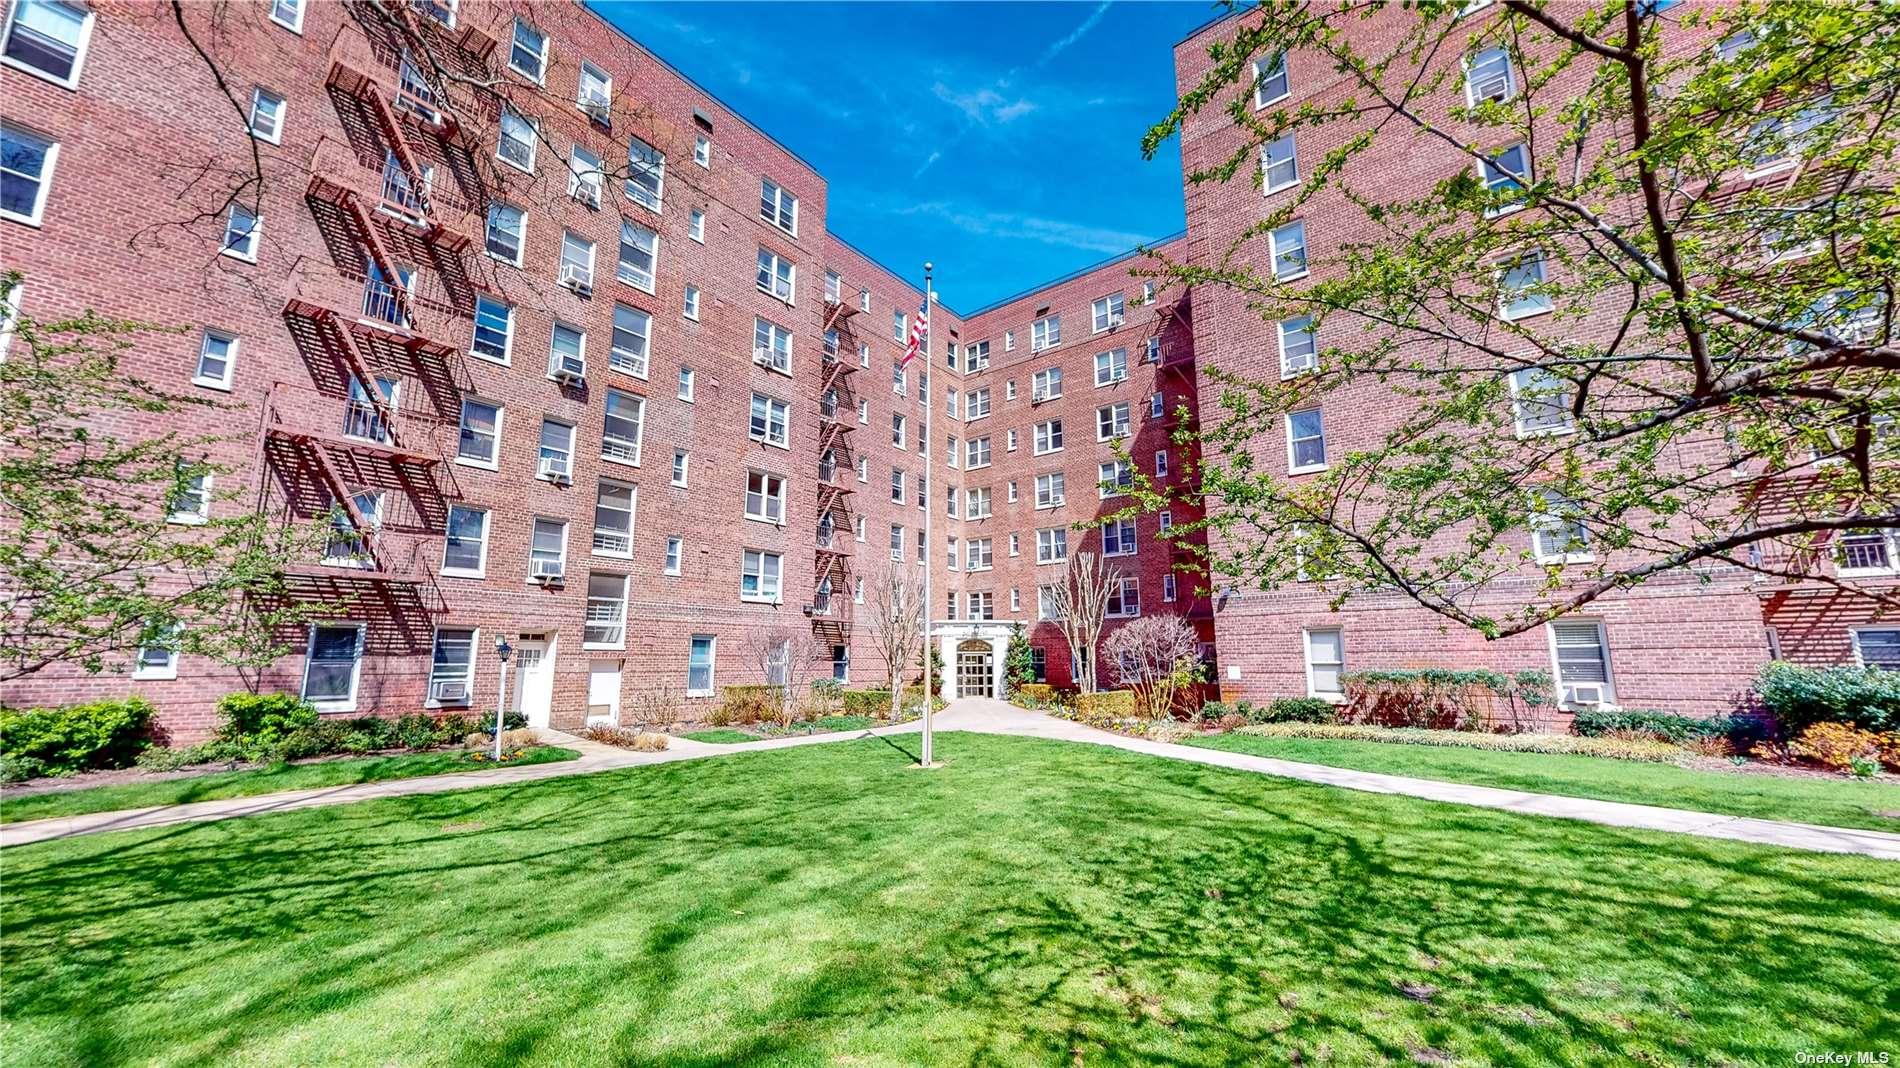 72-61 113th Street #5K in Queens, Forest Hills, NY 11375